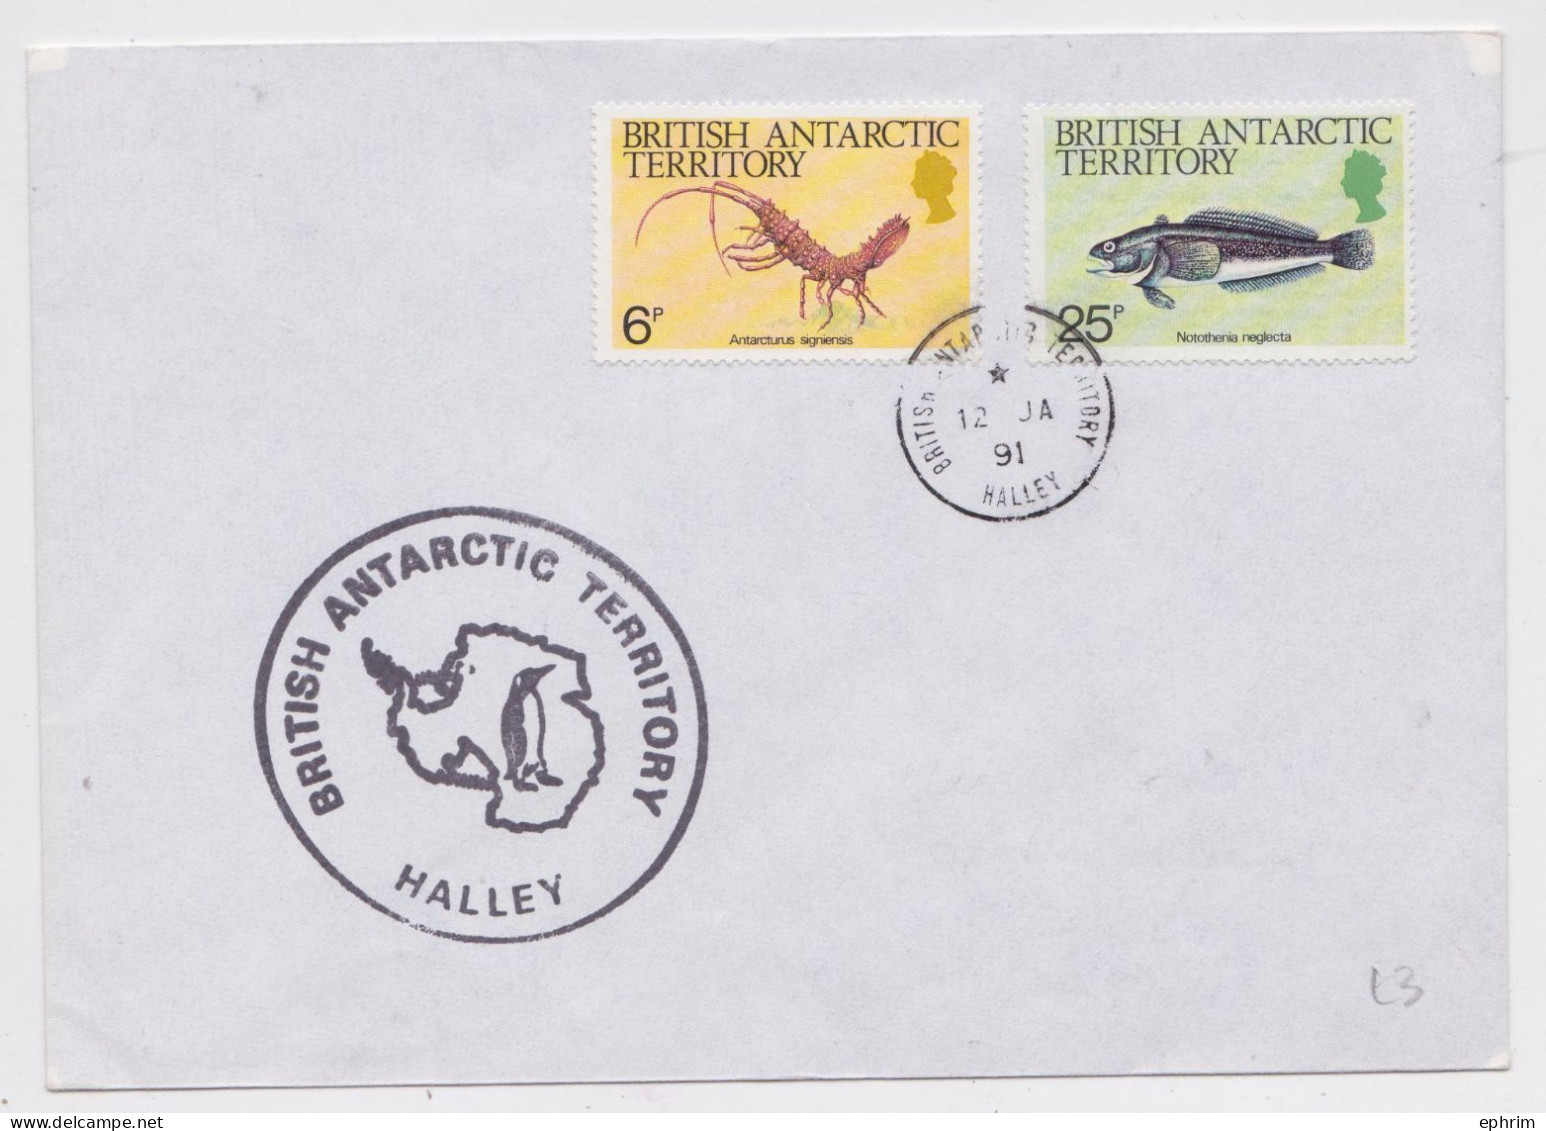 Antarctique BAT Britsh Antarctic Territory Base Halley Marine Life Stamp Cover 1991 Enveloppe Timbre Poisson Crustacé - Covers & Documents